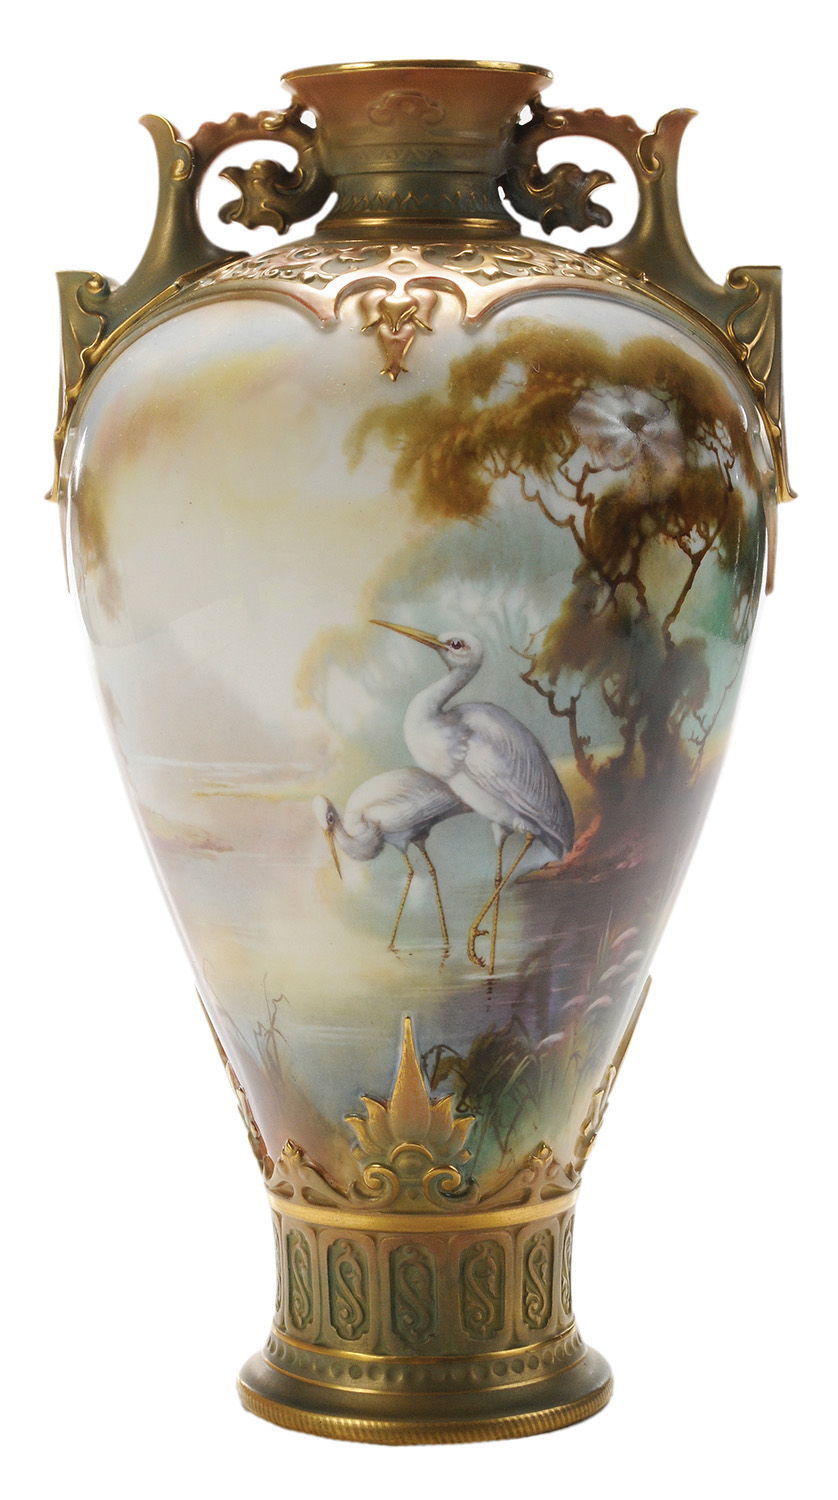 William Powell, a famous painter of birds, decorated this Royal Worcester vase that sold for $1,180 at a May 2015 Brunk auction in Asheville, North Carolina.